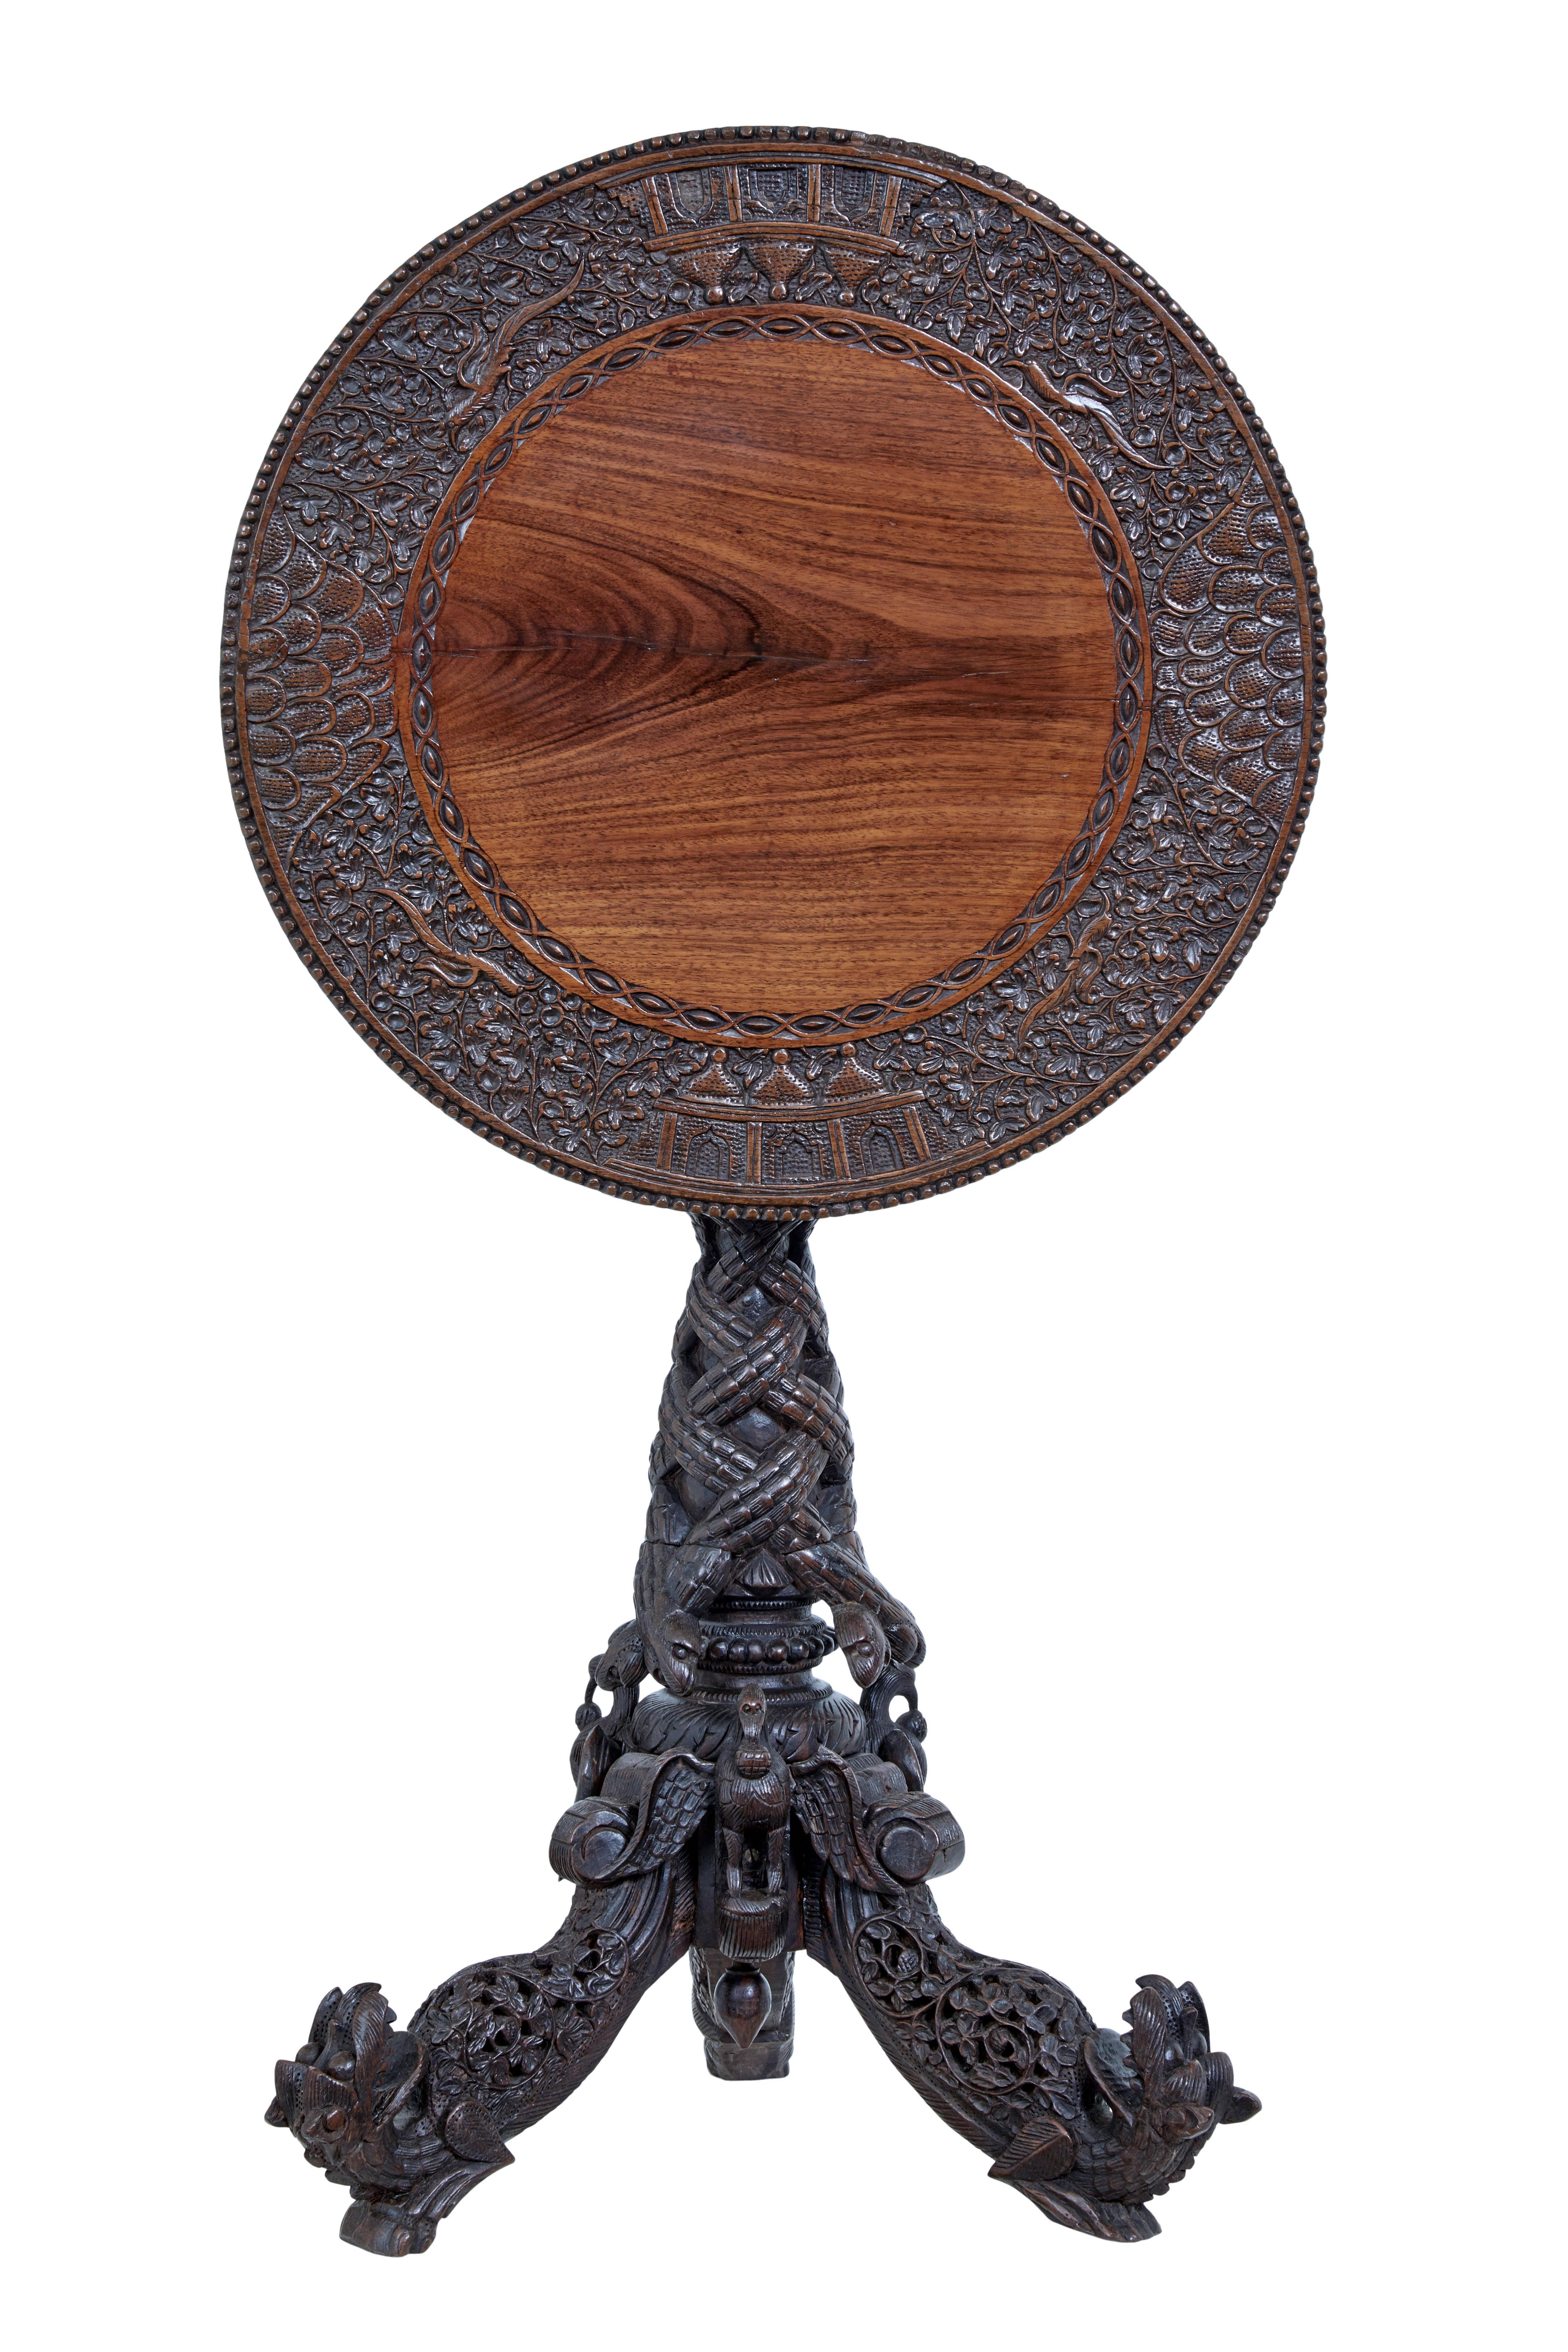 Good quality Burmese / anglo indian tilt top table circa 1880.

Circular top with a carved border of birds, foliage and architecture. Tilting top, which leads down to the carved tripod base. Carved birds and dogs adorn the feet. Age splits to top